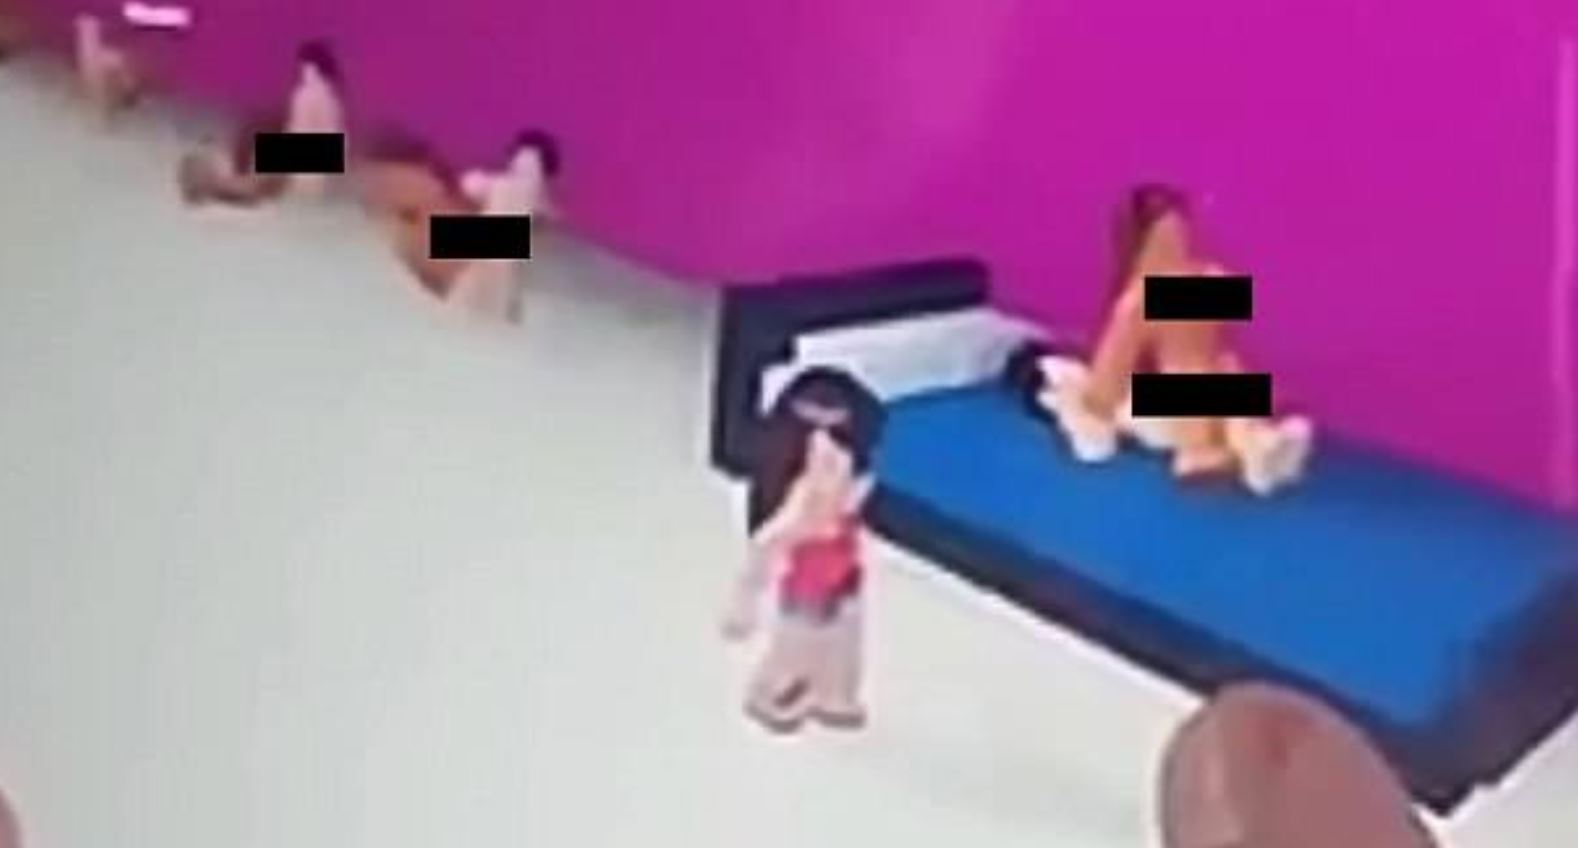 Girl 6 Invited To Sex Room While Playing Children S Video Game Nz Herald - girl sax games on roblox